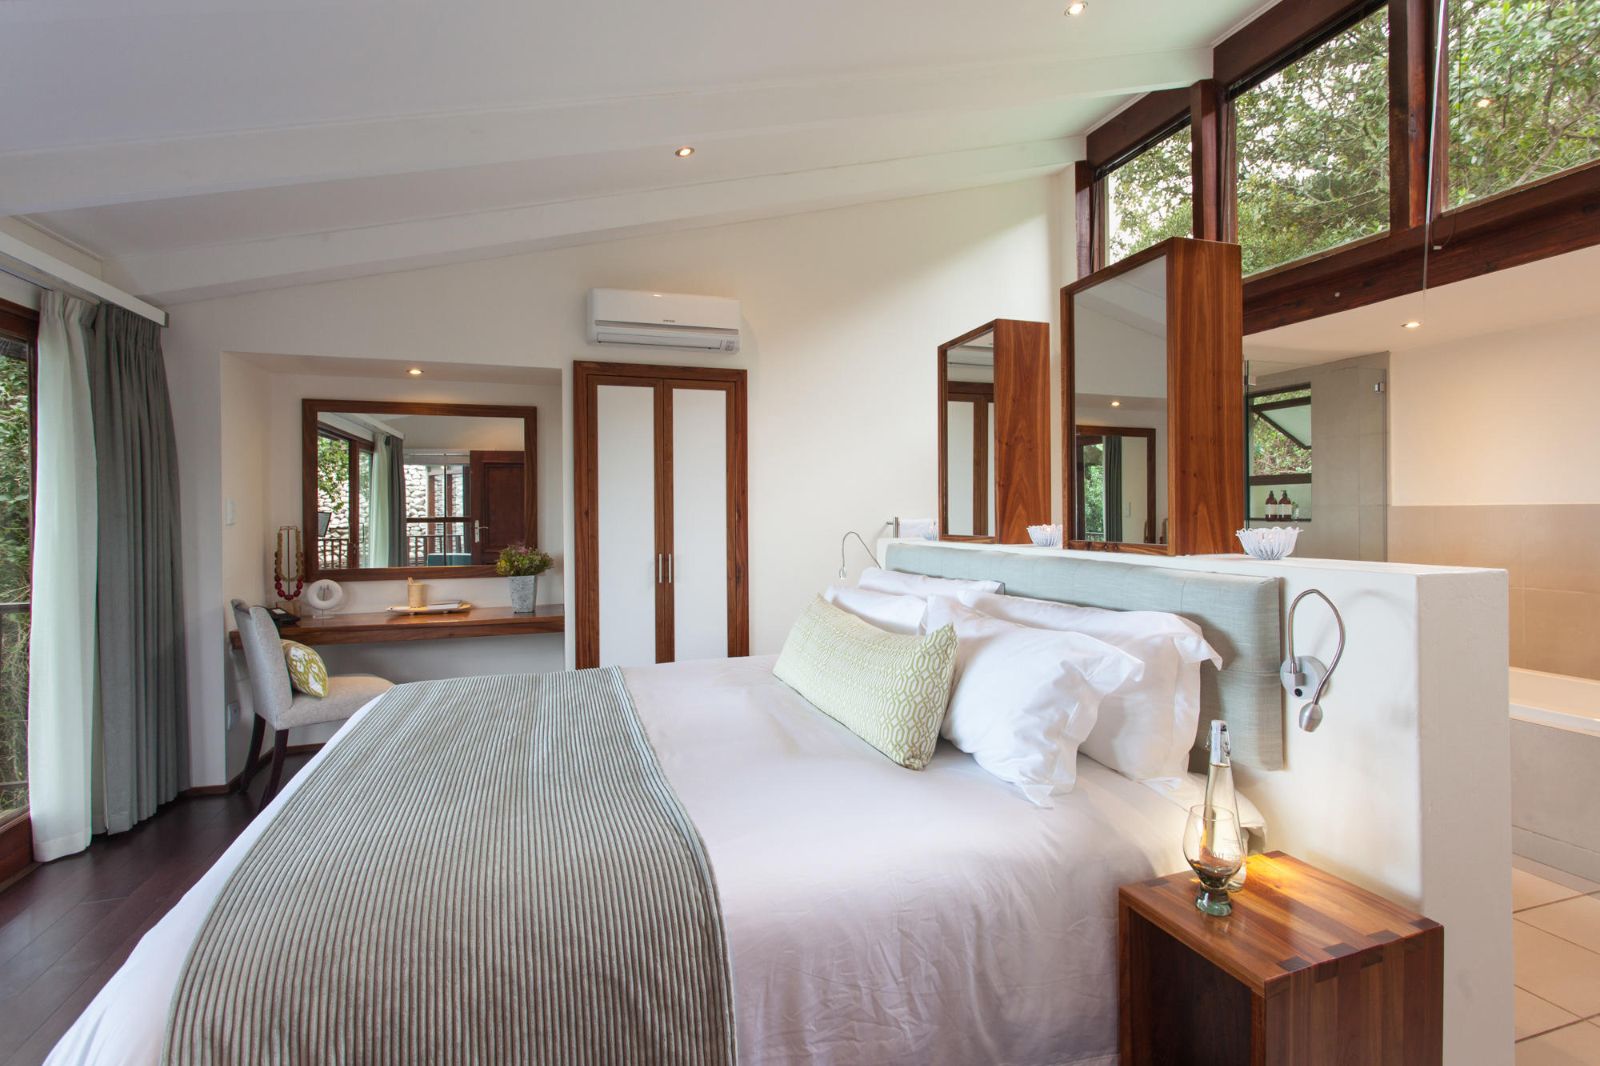 Garden suite bedroom with garden view at luxury lodge Grootbos Garden Lodge in South Africa